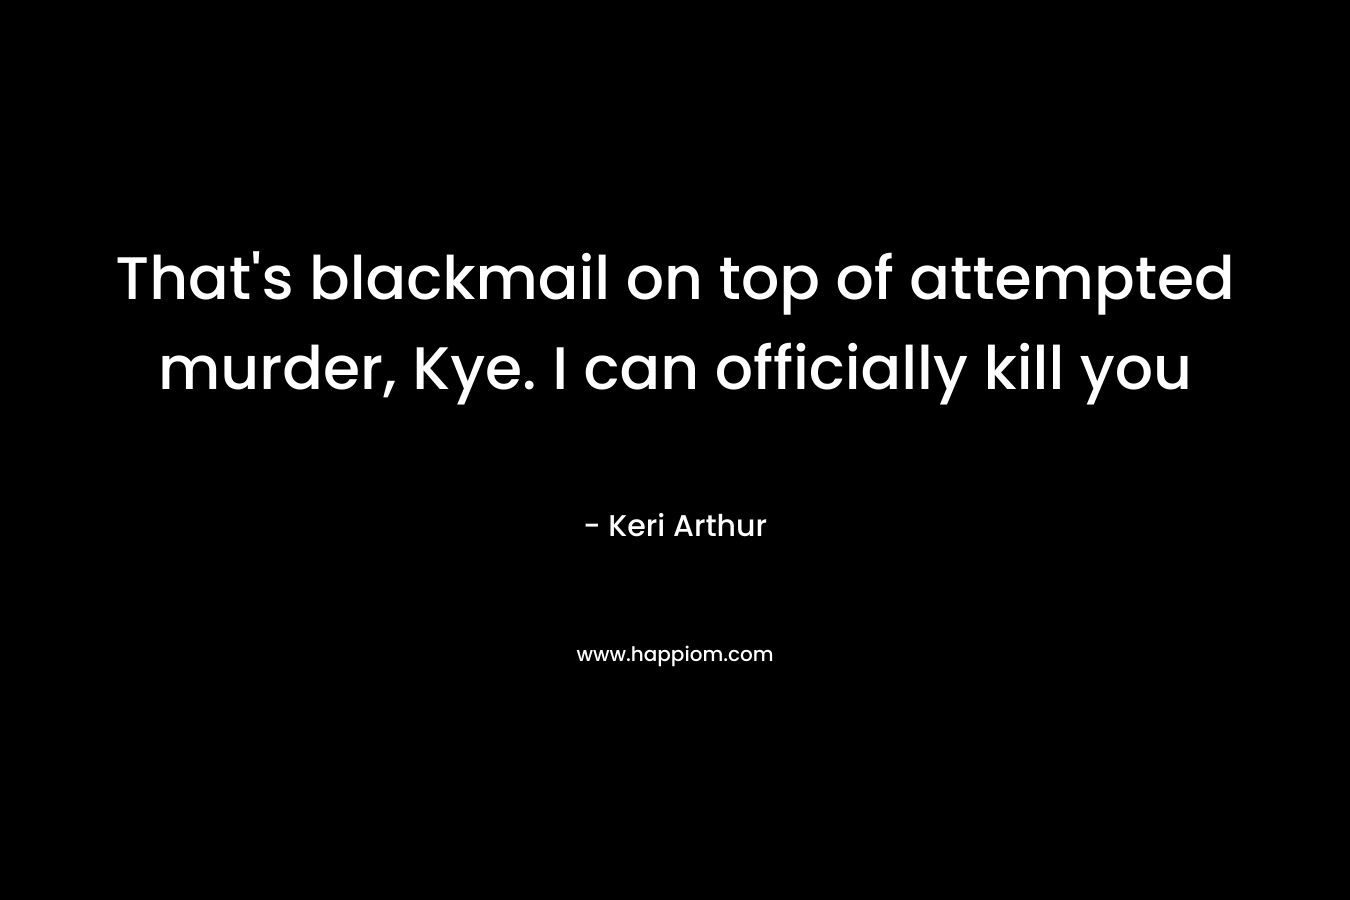 That's blackmail on top of attempted murder, Kye. I can officially kill you